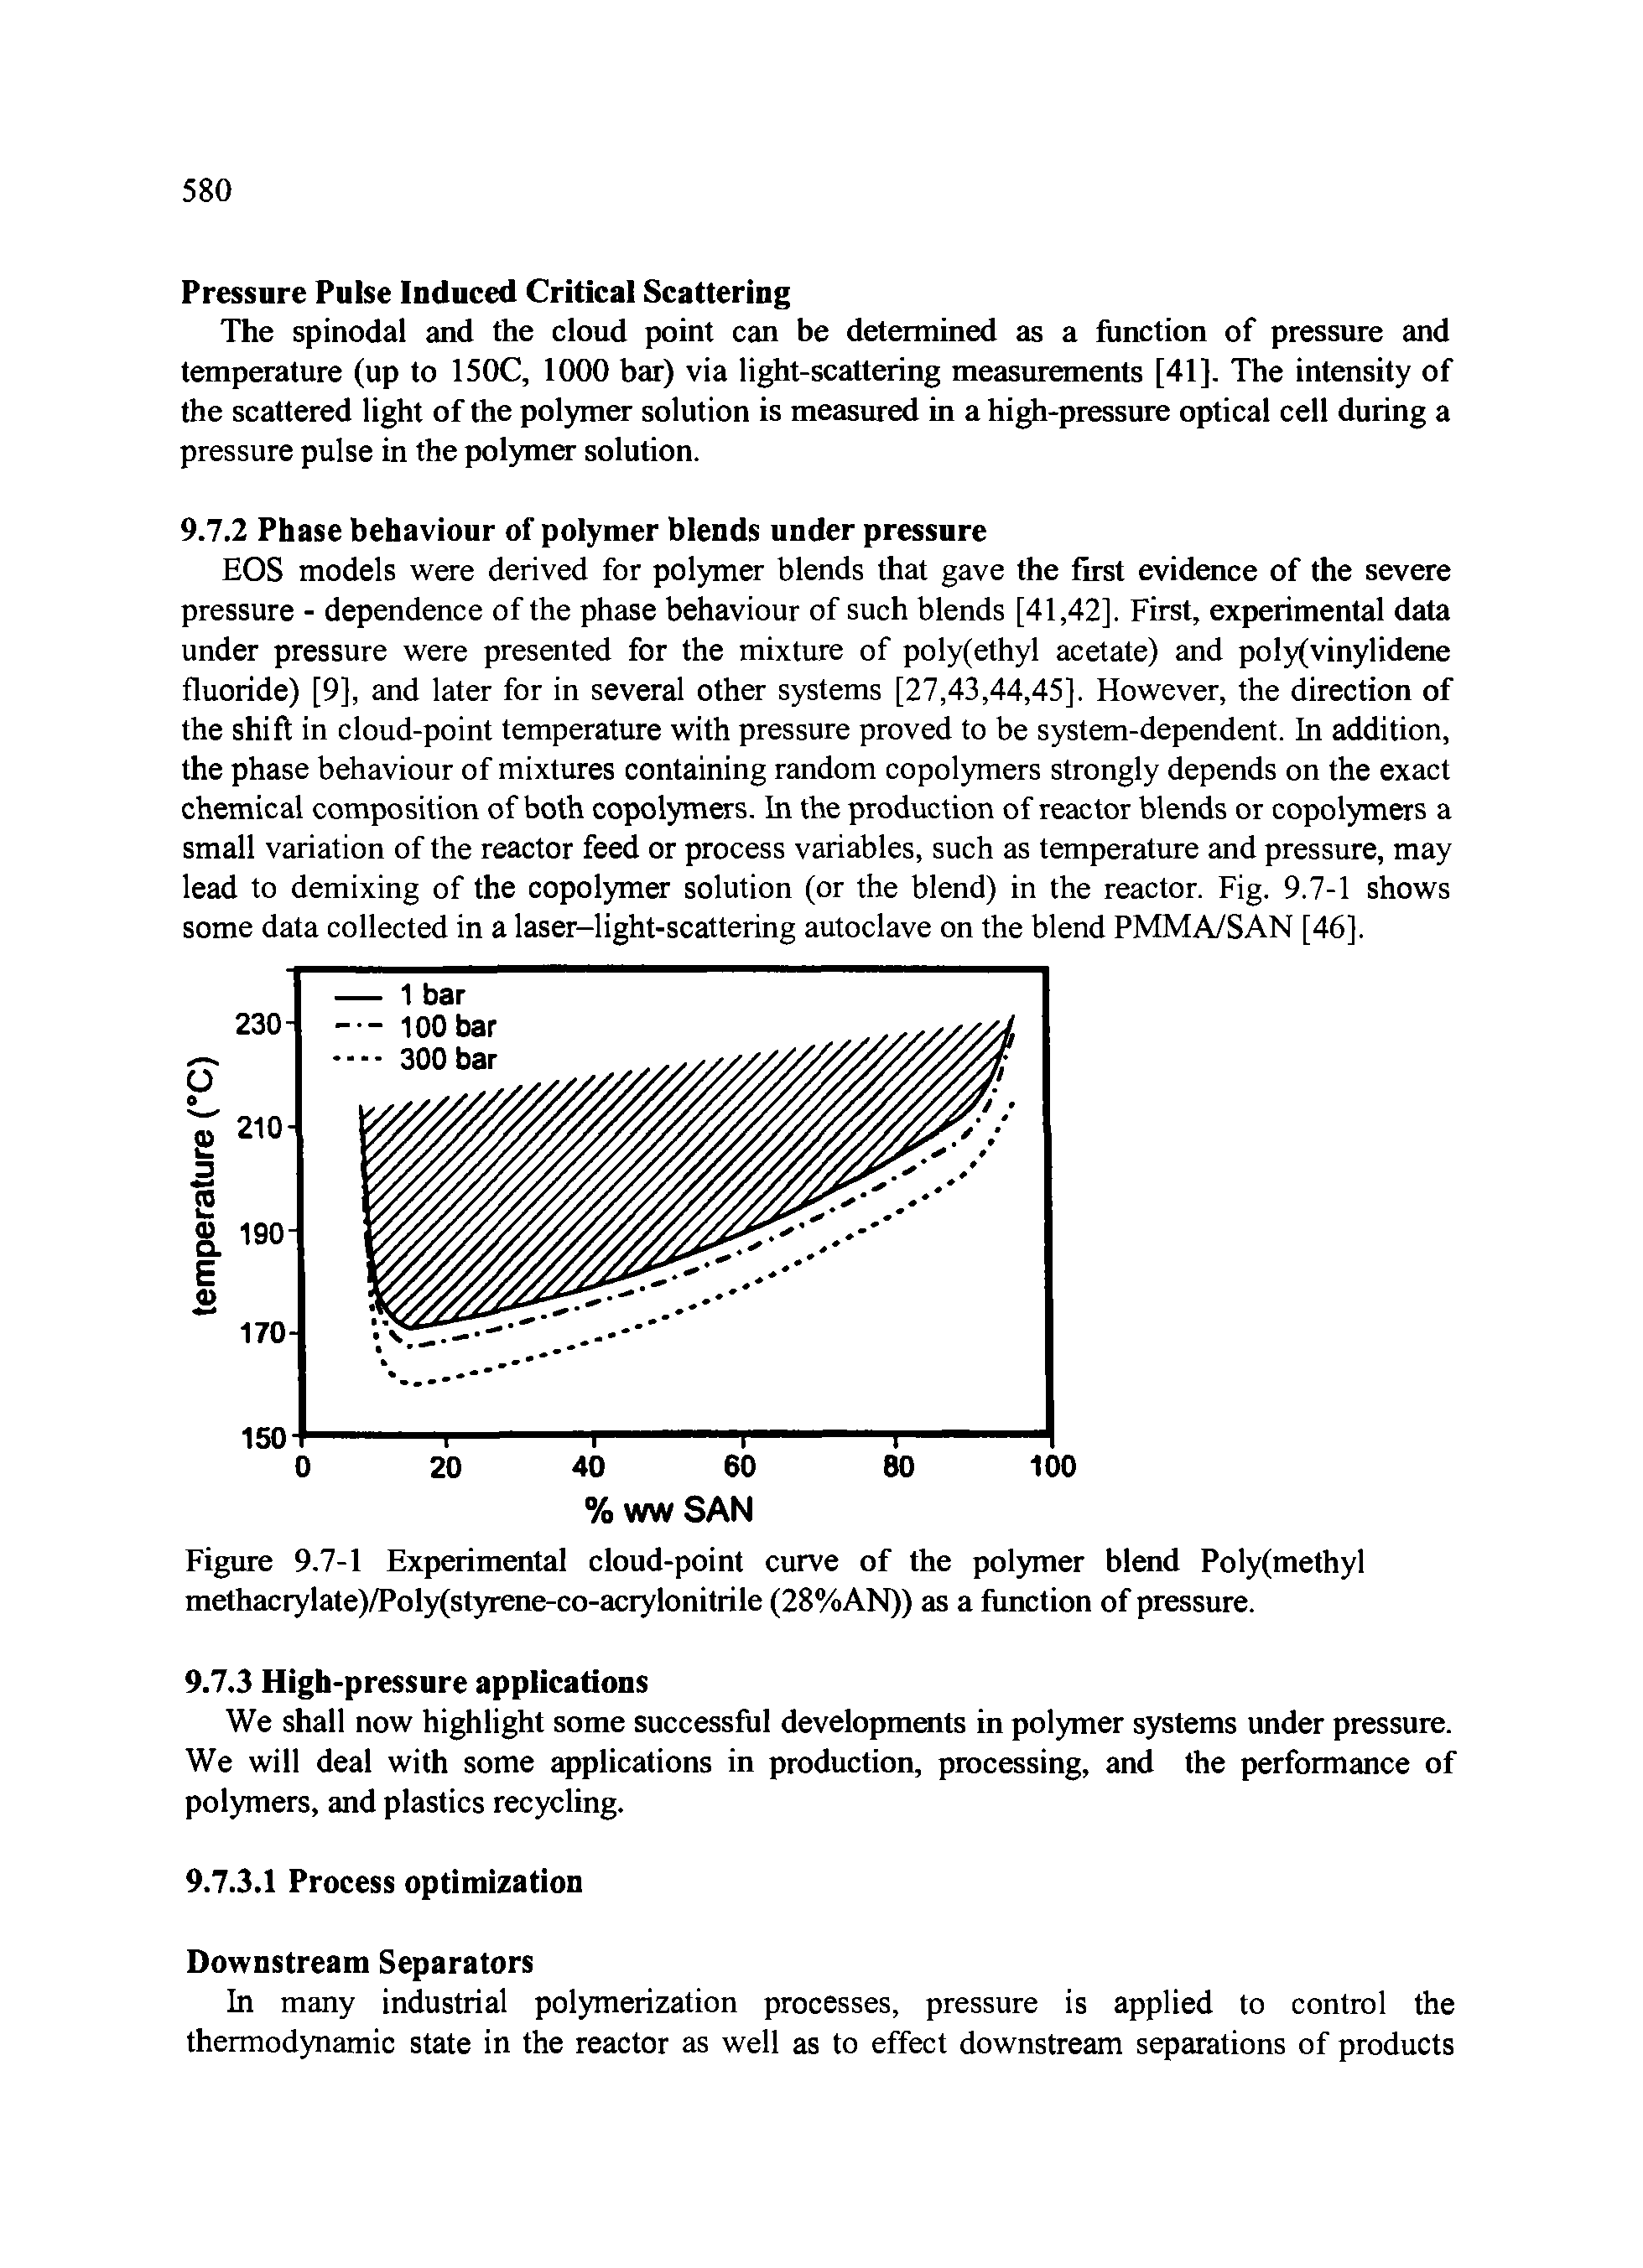 Figure 9.7-1 Experimental cloud-point curve of the polymer blend Poly(methyl methacrylate)/Poly(styrene-co-acrylonitrile (28%AN)) as a function of pressure.